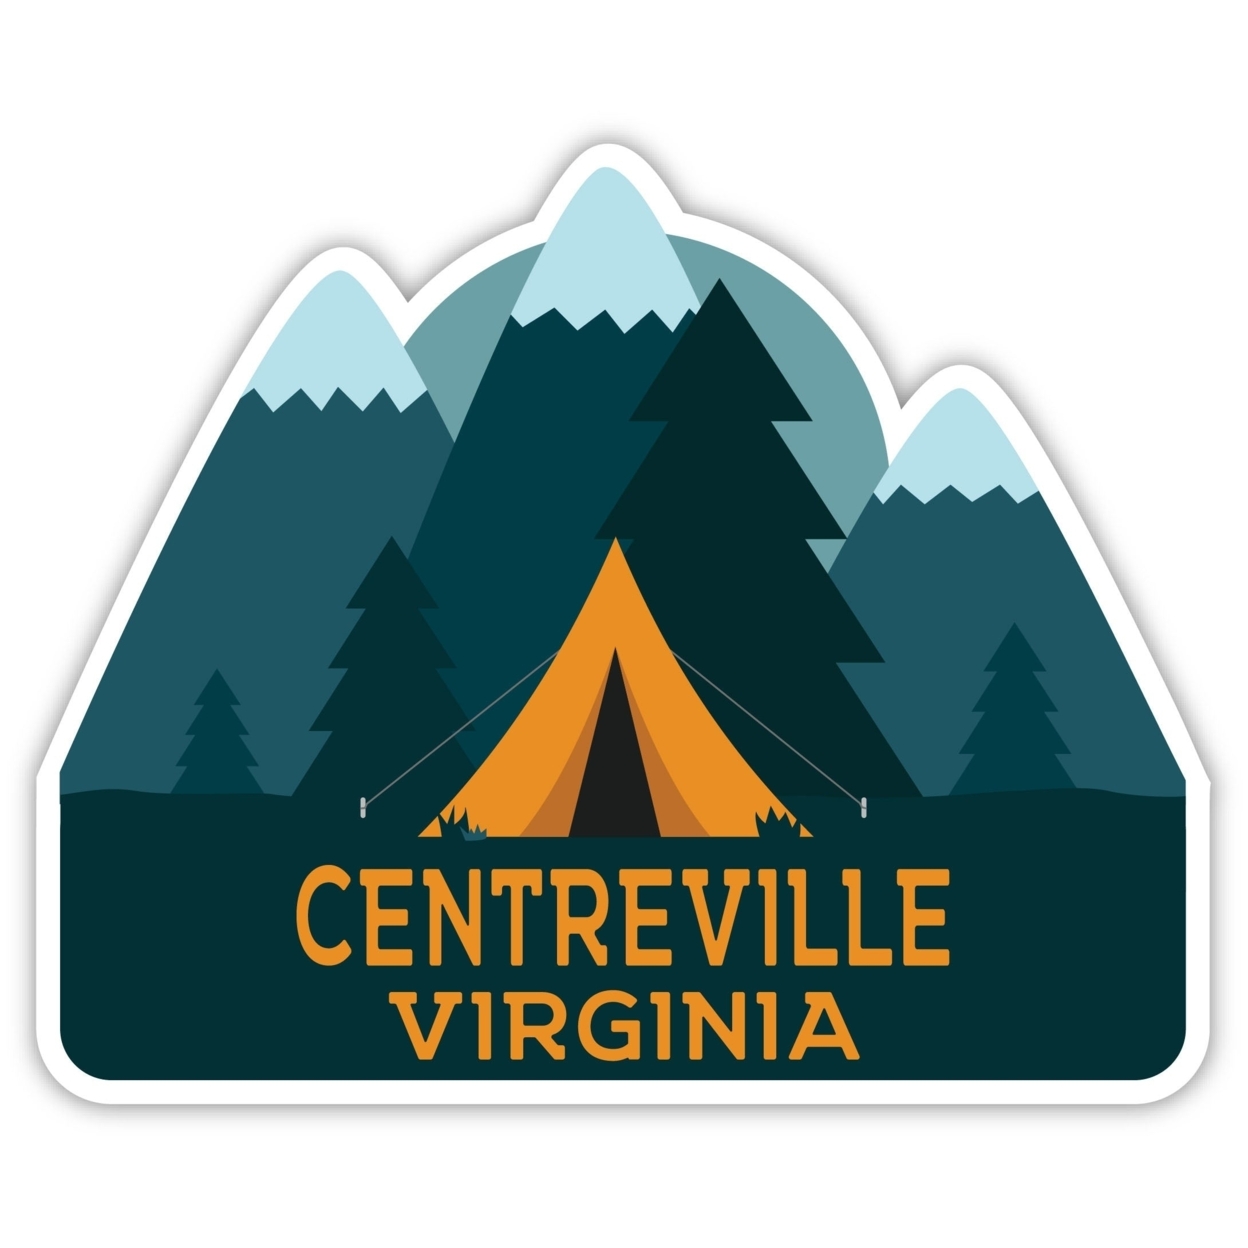 Centreville Virginia Souvenir Decorative Stickers (Choose Theme And Size) - 4-Pack, 12-Inch, Tent